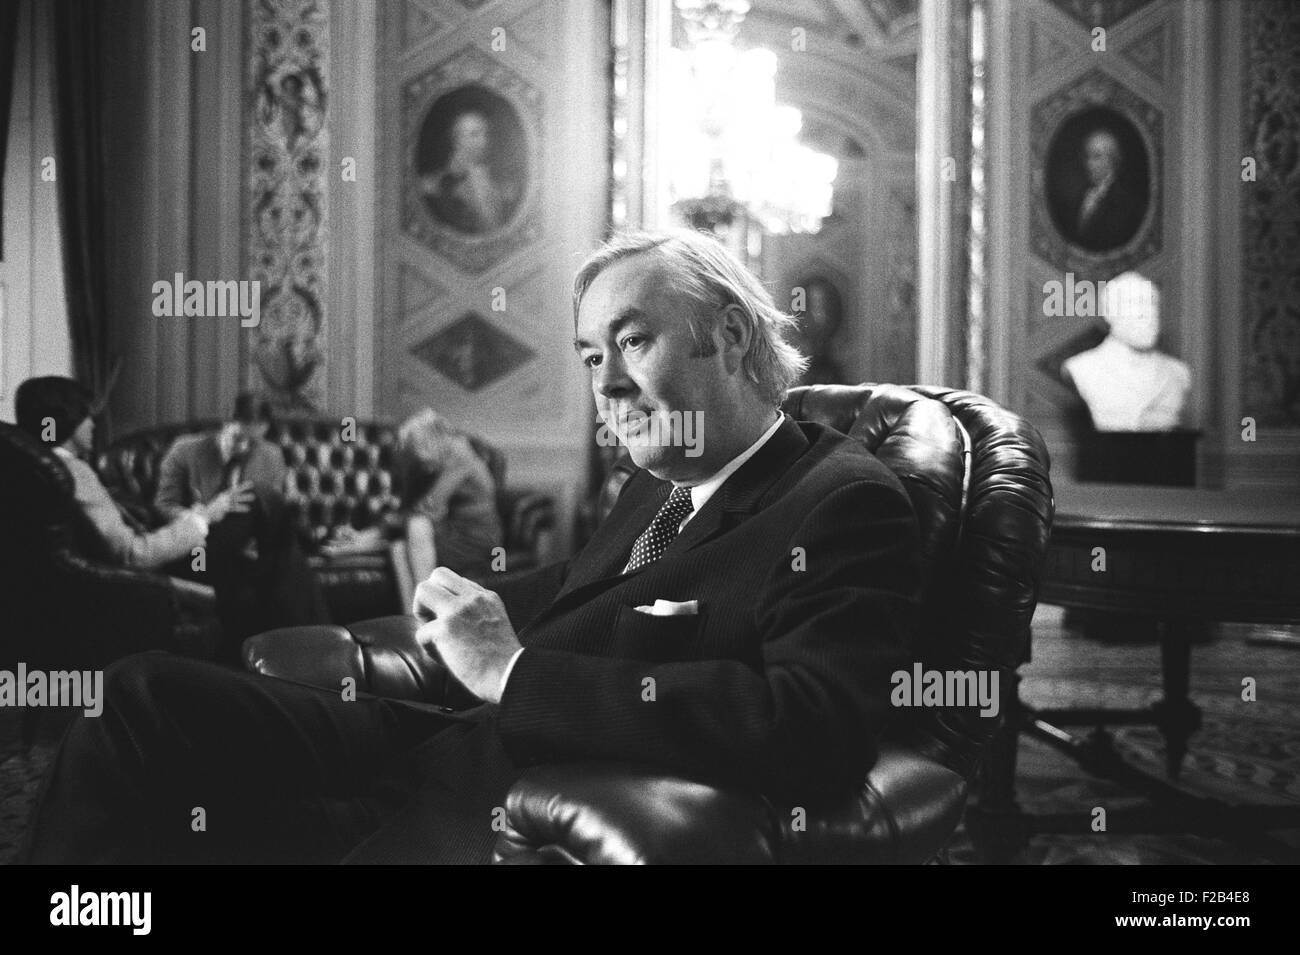 Democratic Senator Daniel Moynihan in the U.S. Capitol, Jan 24, 1977. He served in the Kennedy, Johnson, Nixon, and Ford Administrations before he was elected to the Senate in 1976. - (BSLOC 2015 1 50) Stock Photo